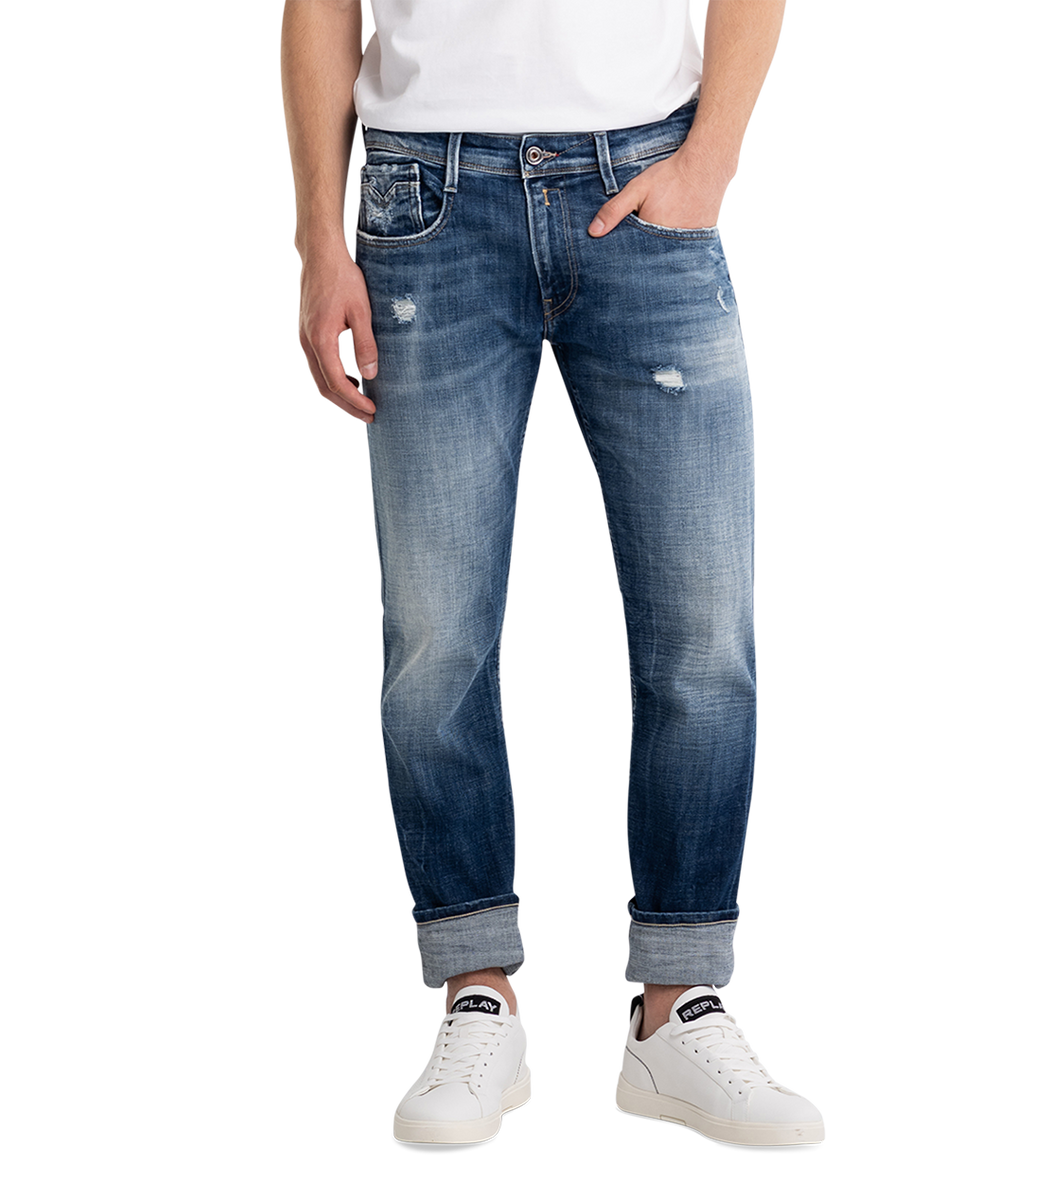 Highly Distressed Jeans - Buy Highly Distressed Jeans Online Starting at  Just ₹474